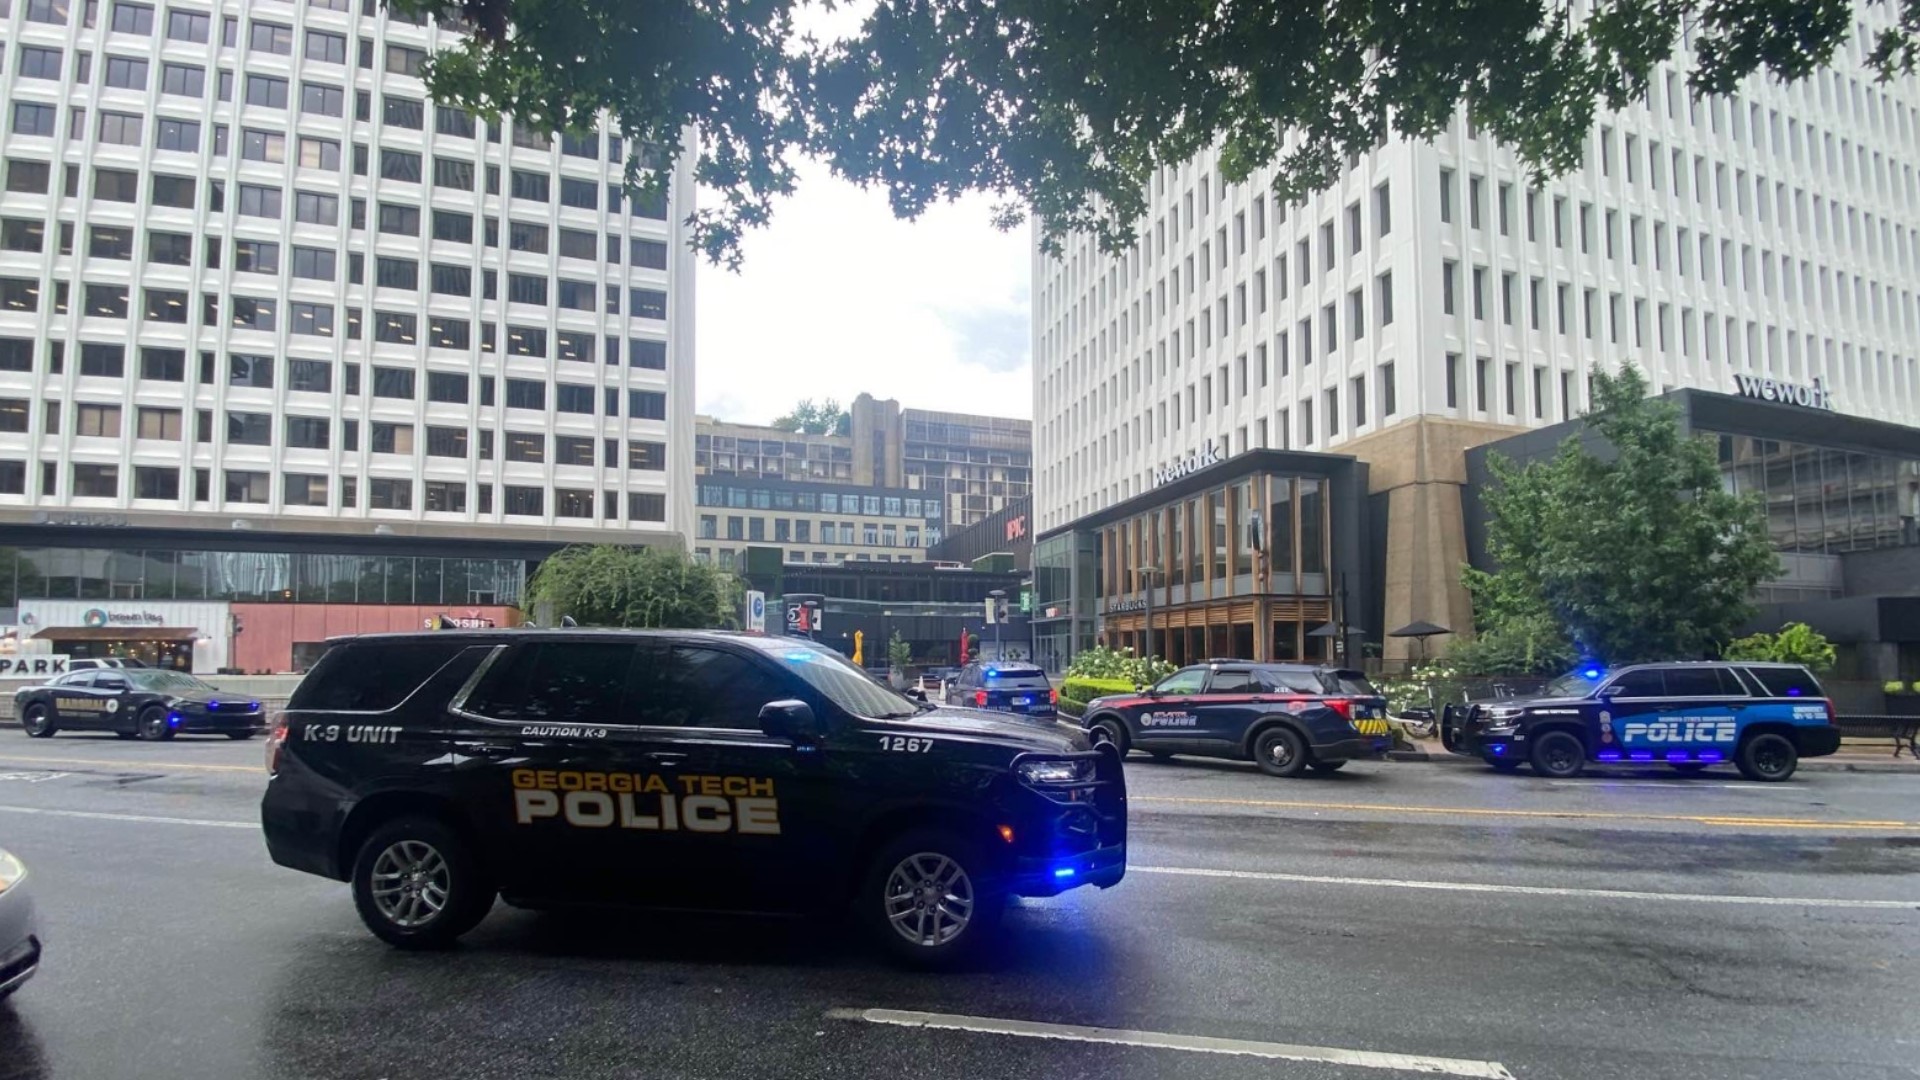 APD is asking residents to stay off the roads near the Midtown area, specifically between 12th Street and Peachtree St. NE and 15th Street and W. Peachtree St. NW.